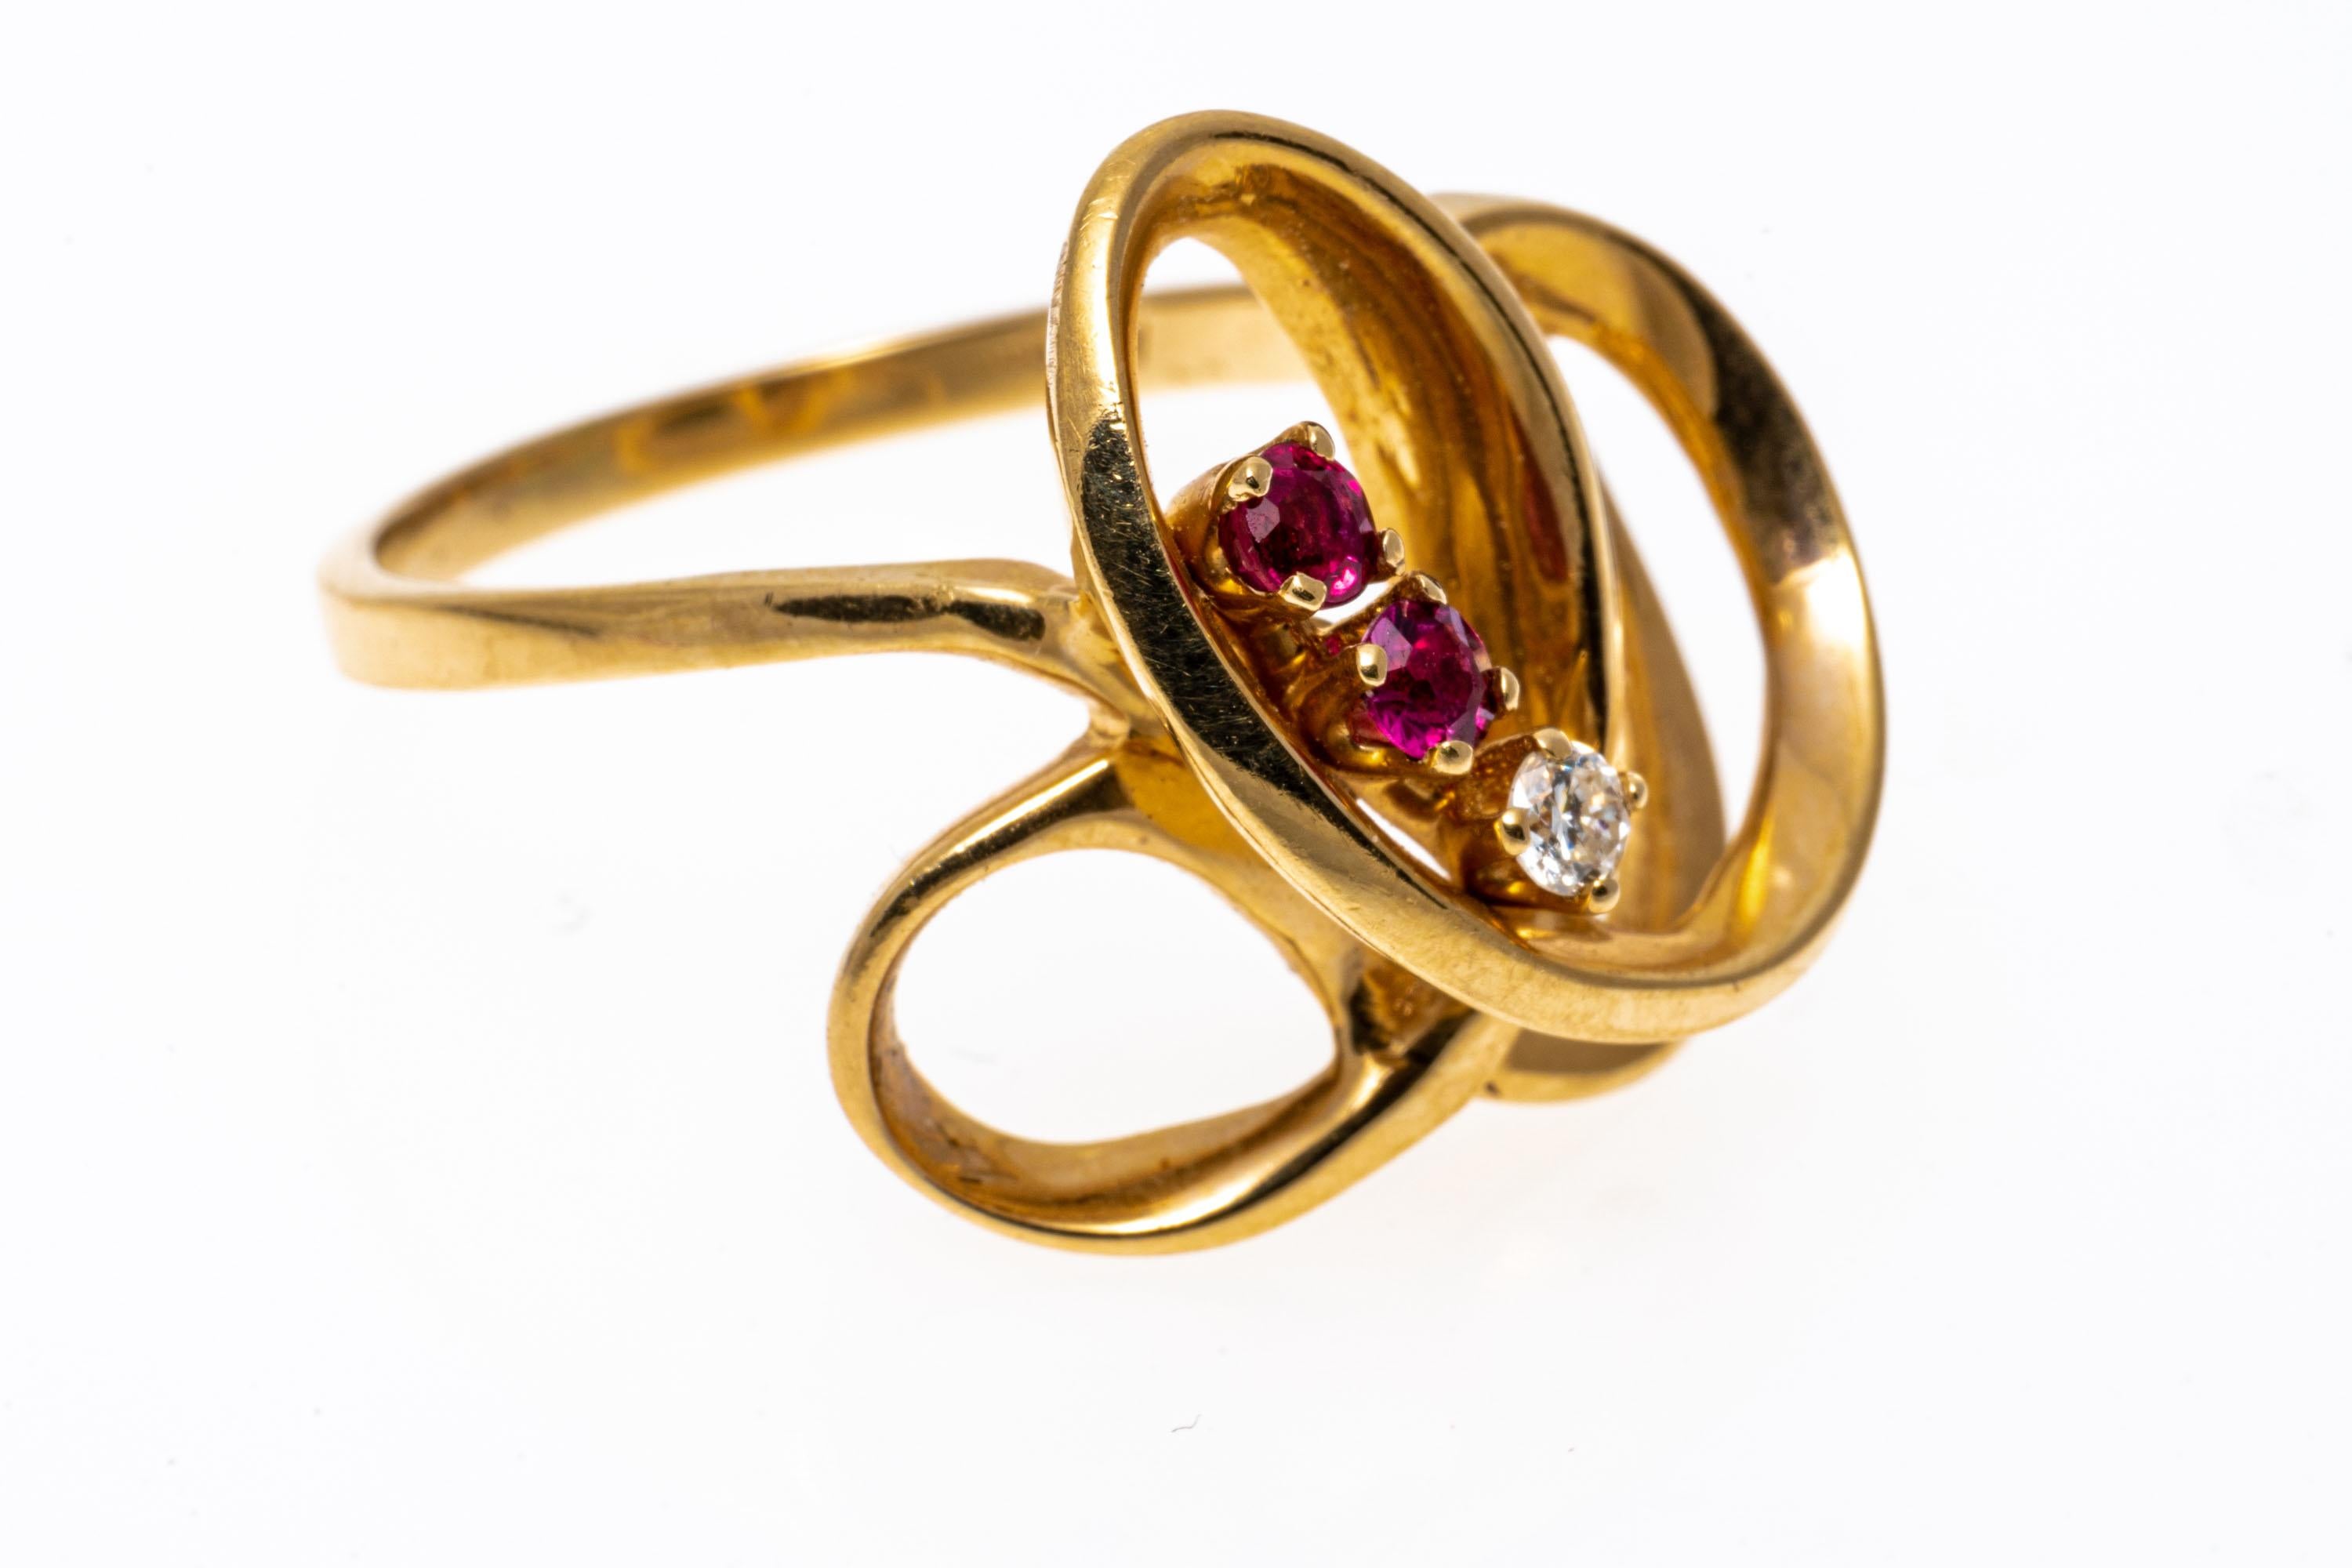 14k yellow gold ring. This contemporary ring is a high polished, yellow gold open swirl style, decorated with two round faceted, pinkish red rubies, approximately 0.18 TCW, and one round faceted diamond, 0.04 CTS, prong set.
Marks: None, tests